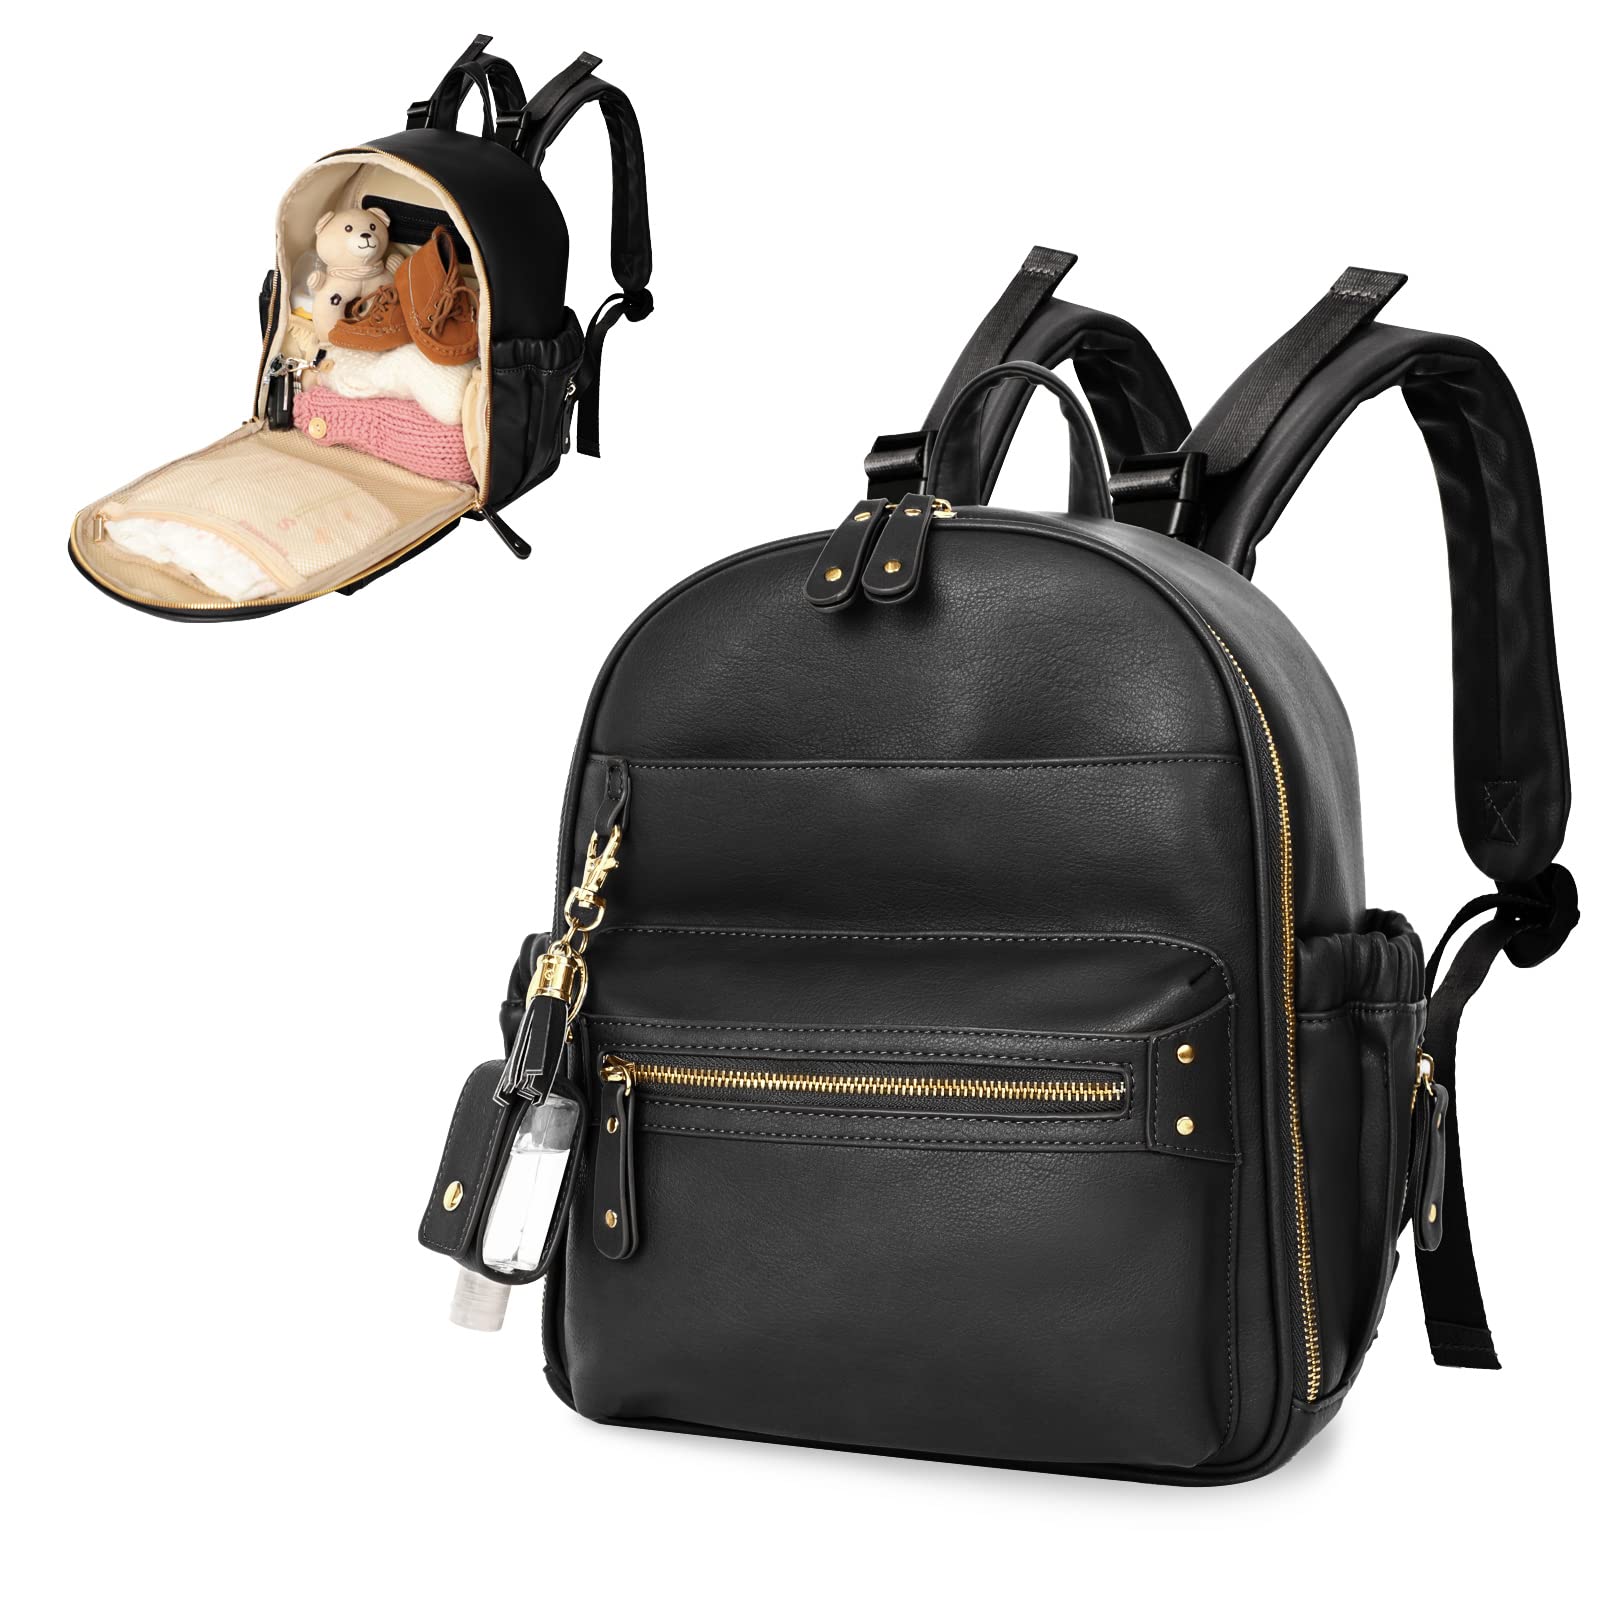 Mini Diaper Bag Backpack Leather Diaper Bag with Pacifier Holder Case Bundle